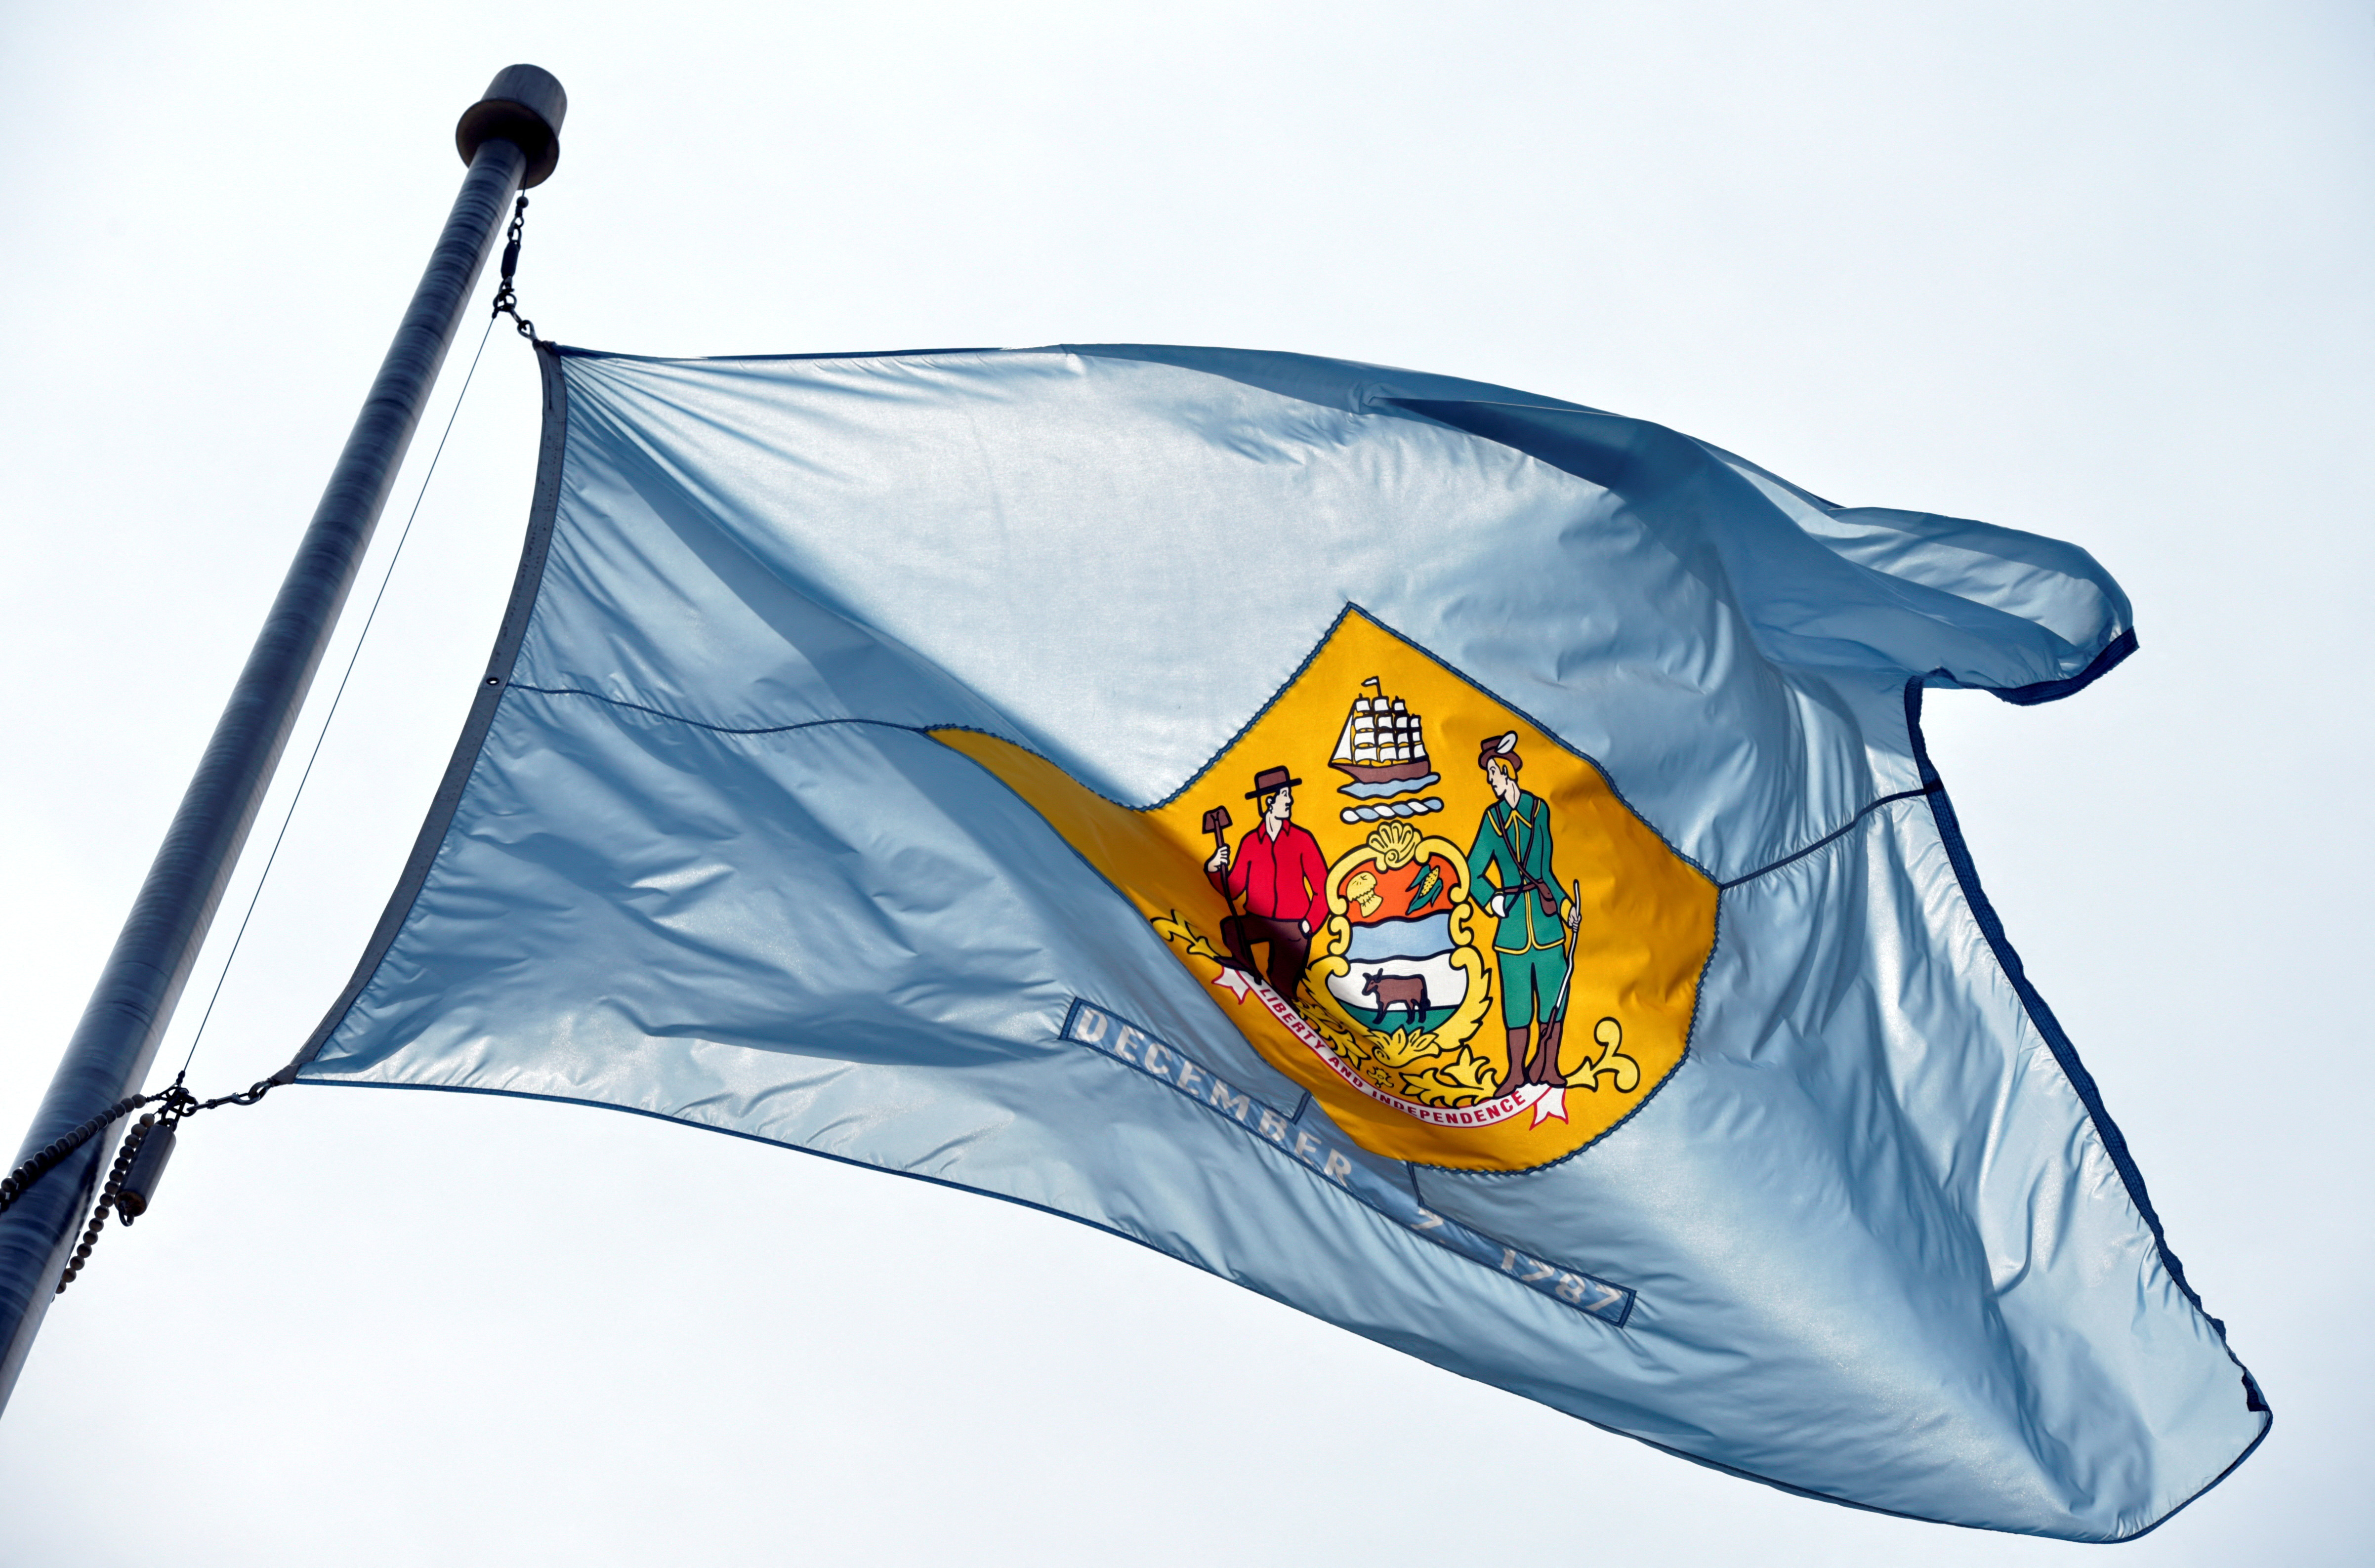 View of the state of Delaware flag